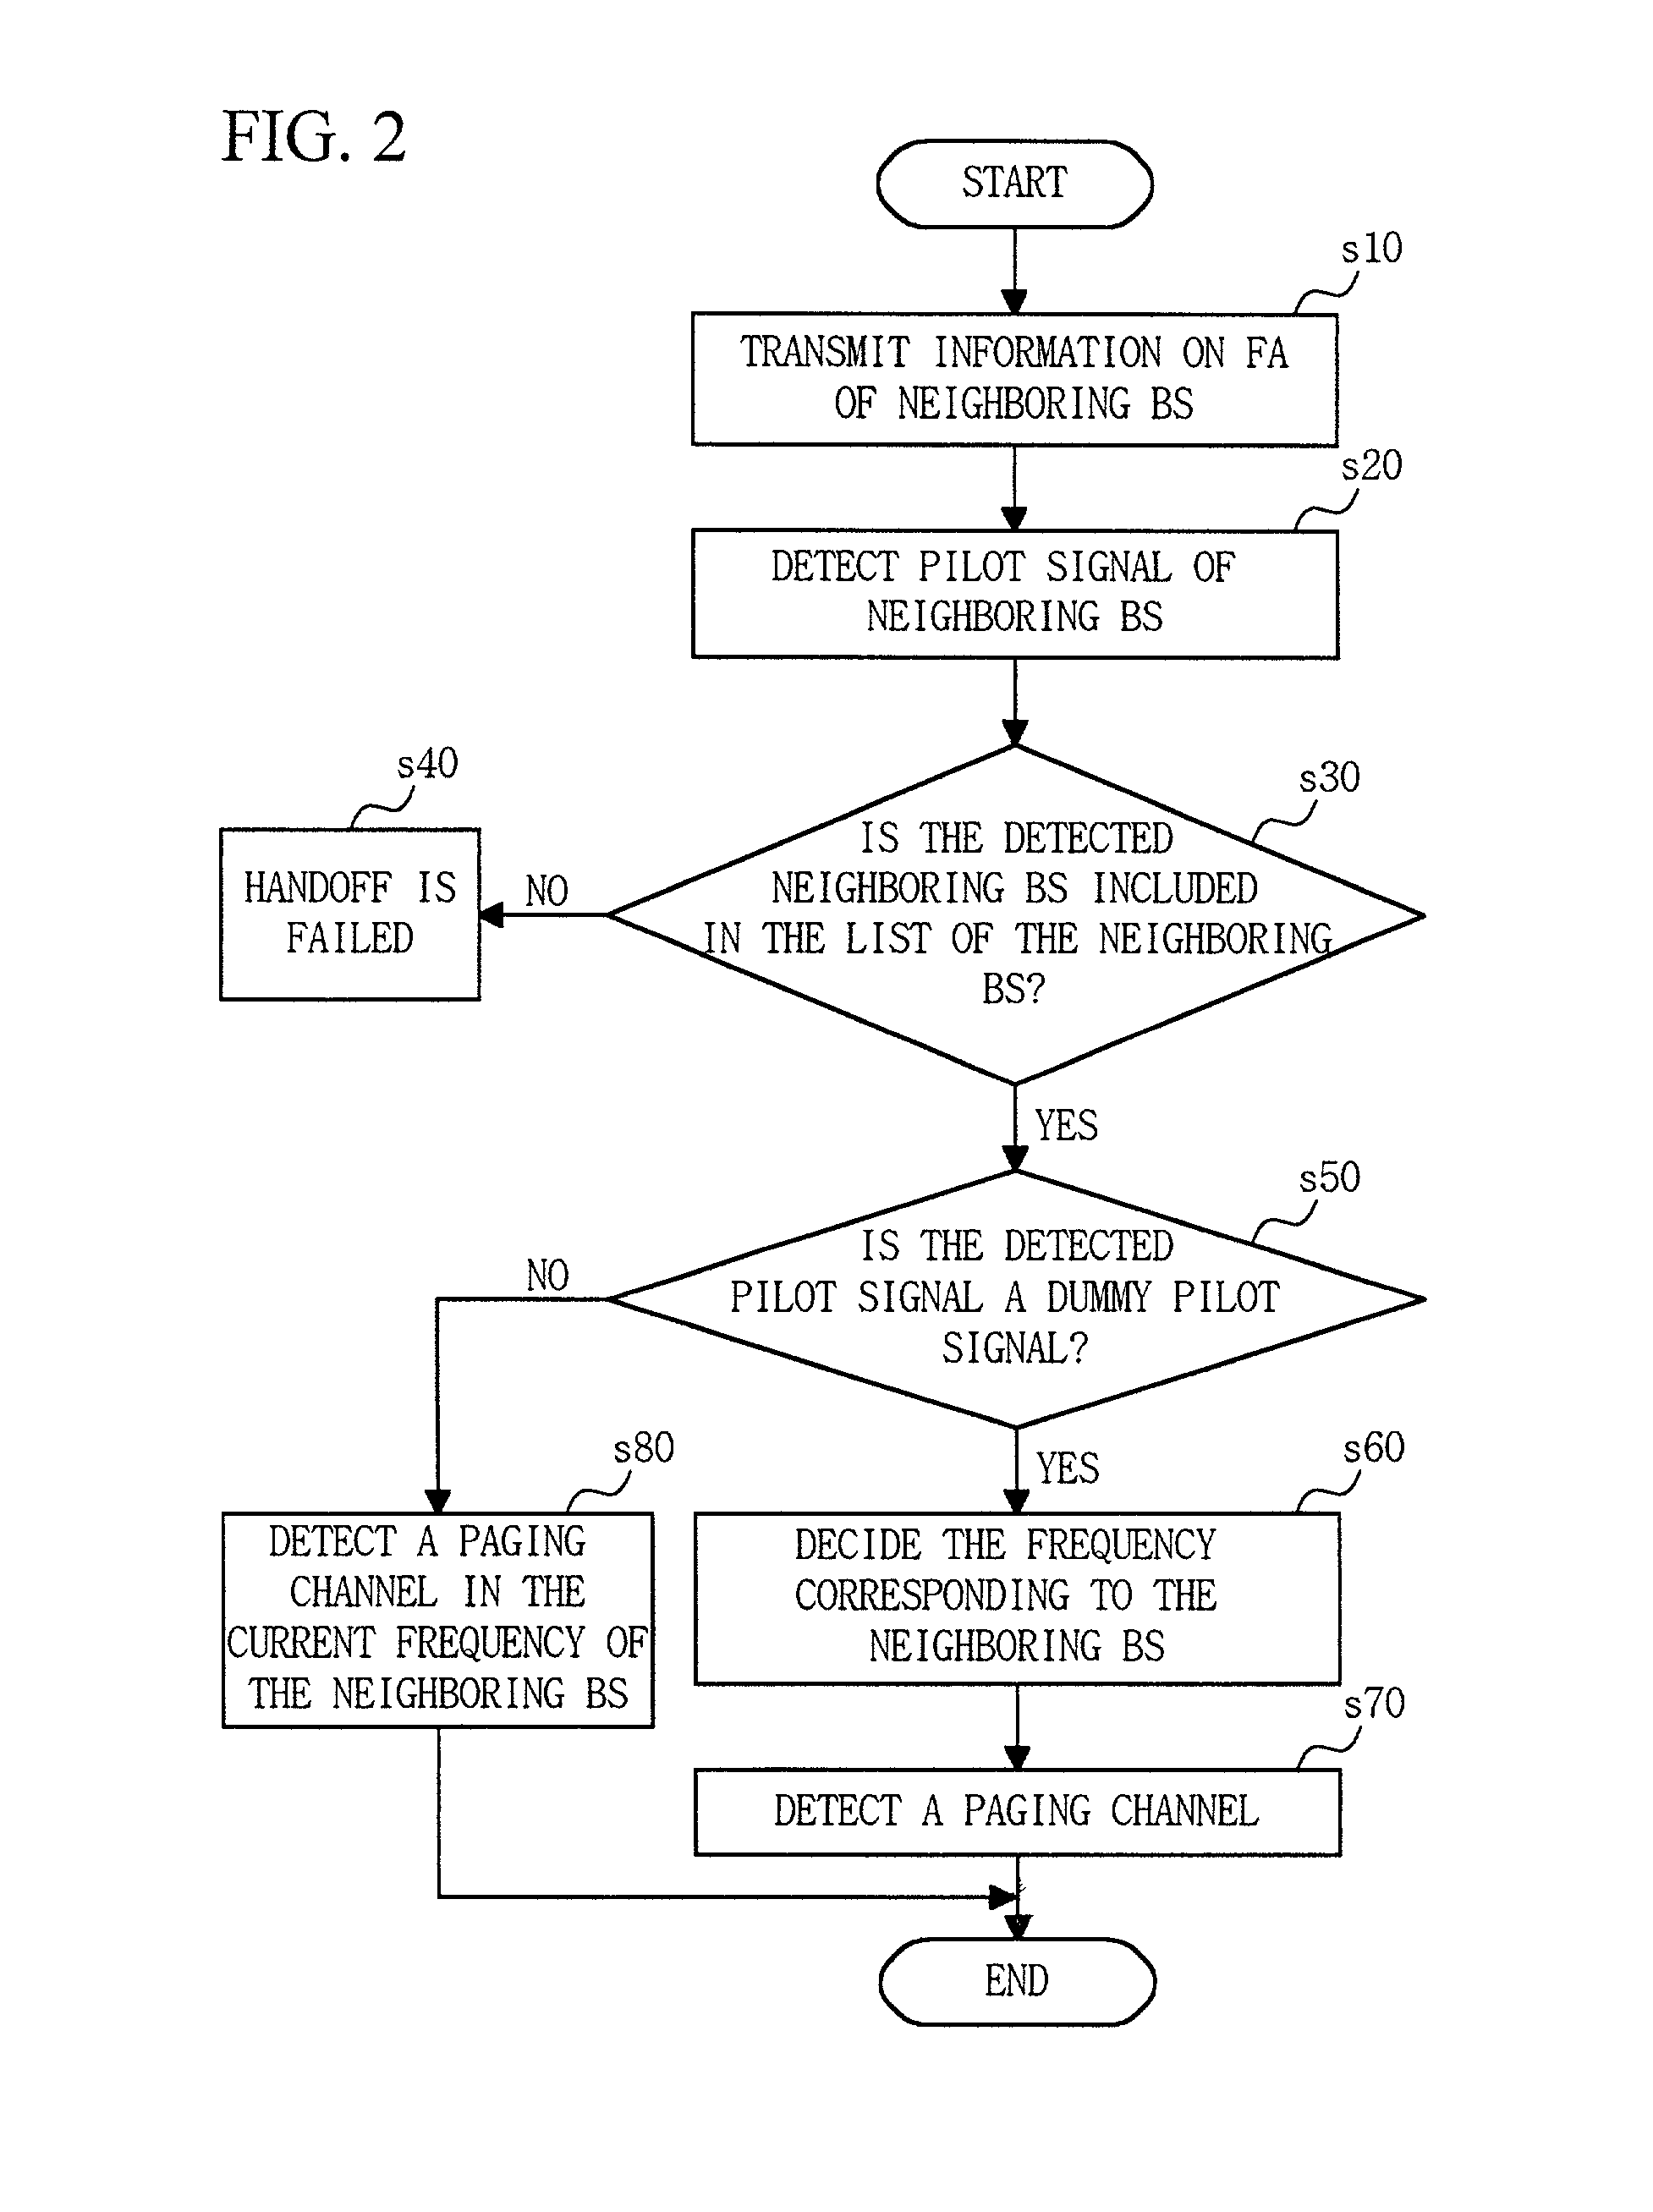 Method and apparatus for idle handoff in a cellular system